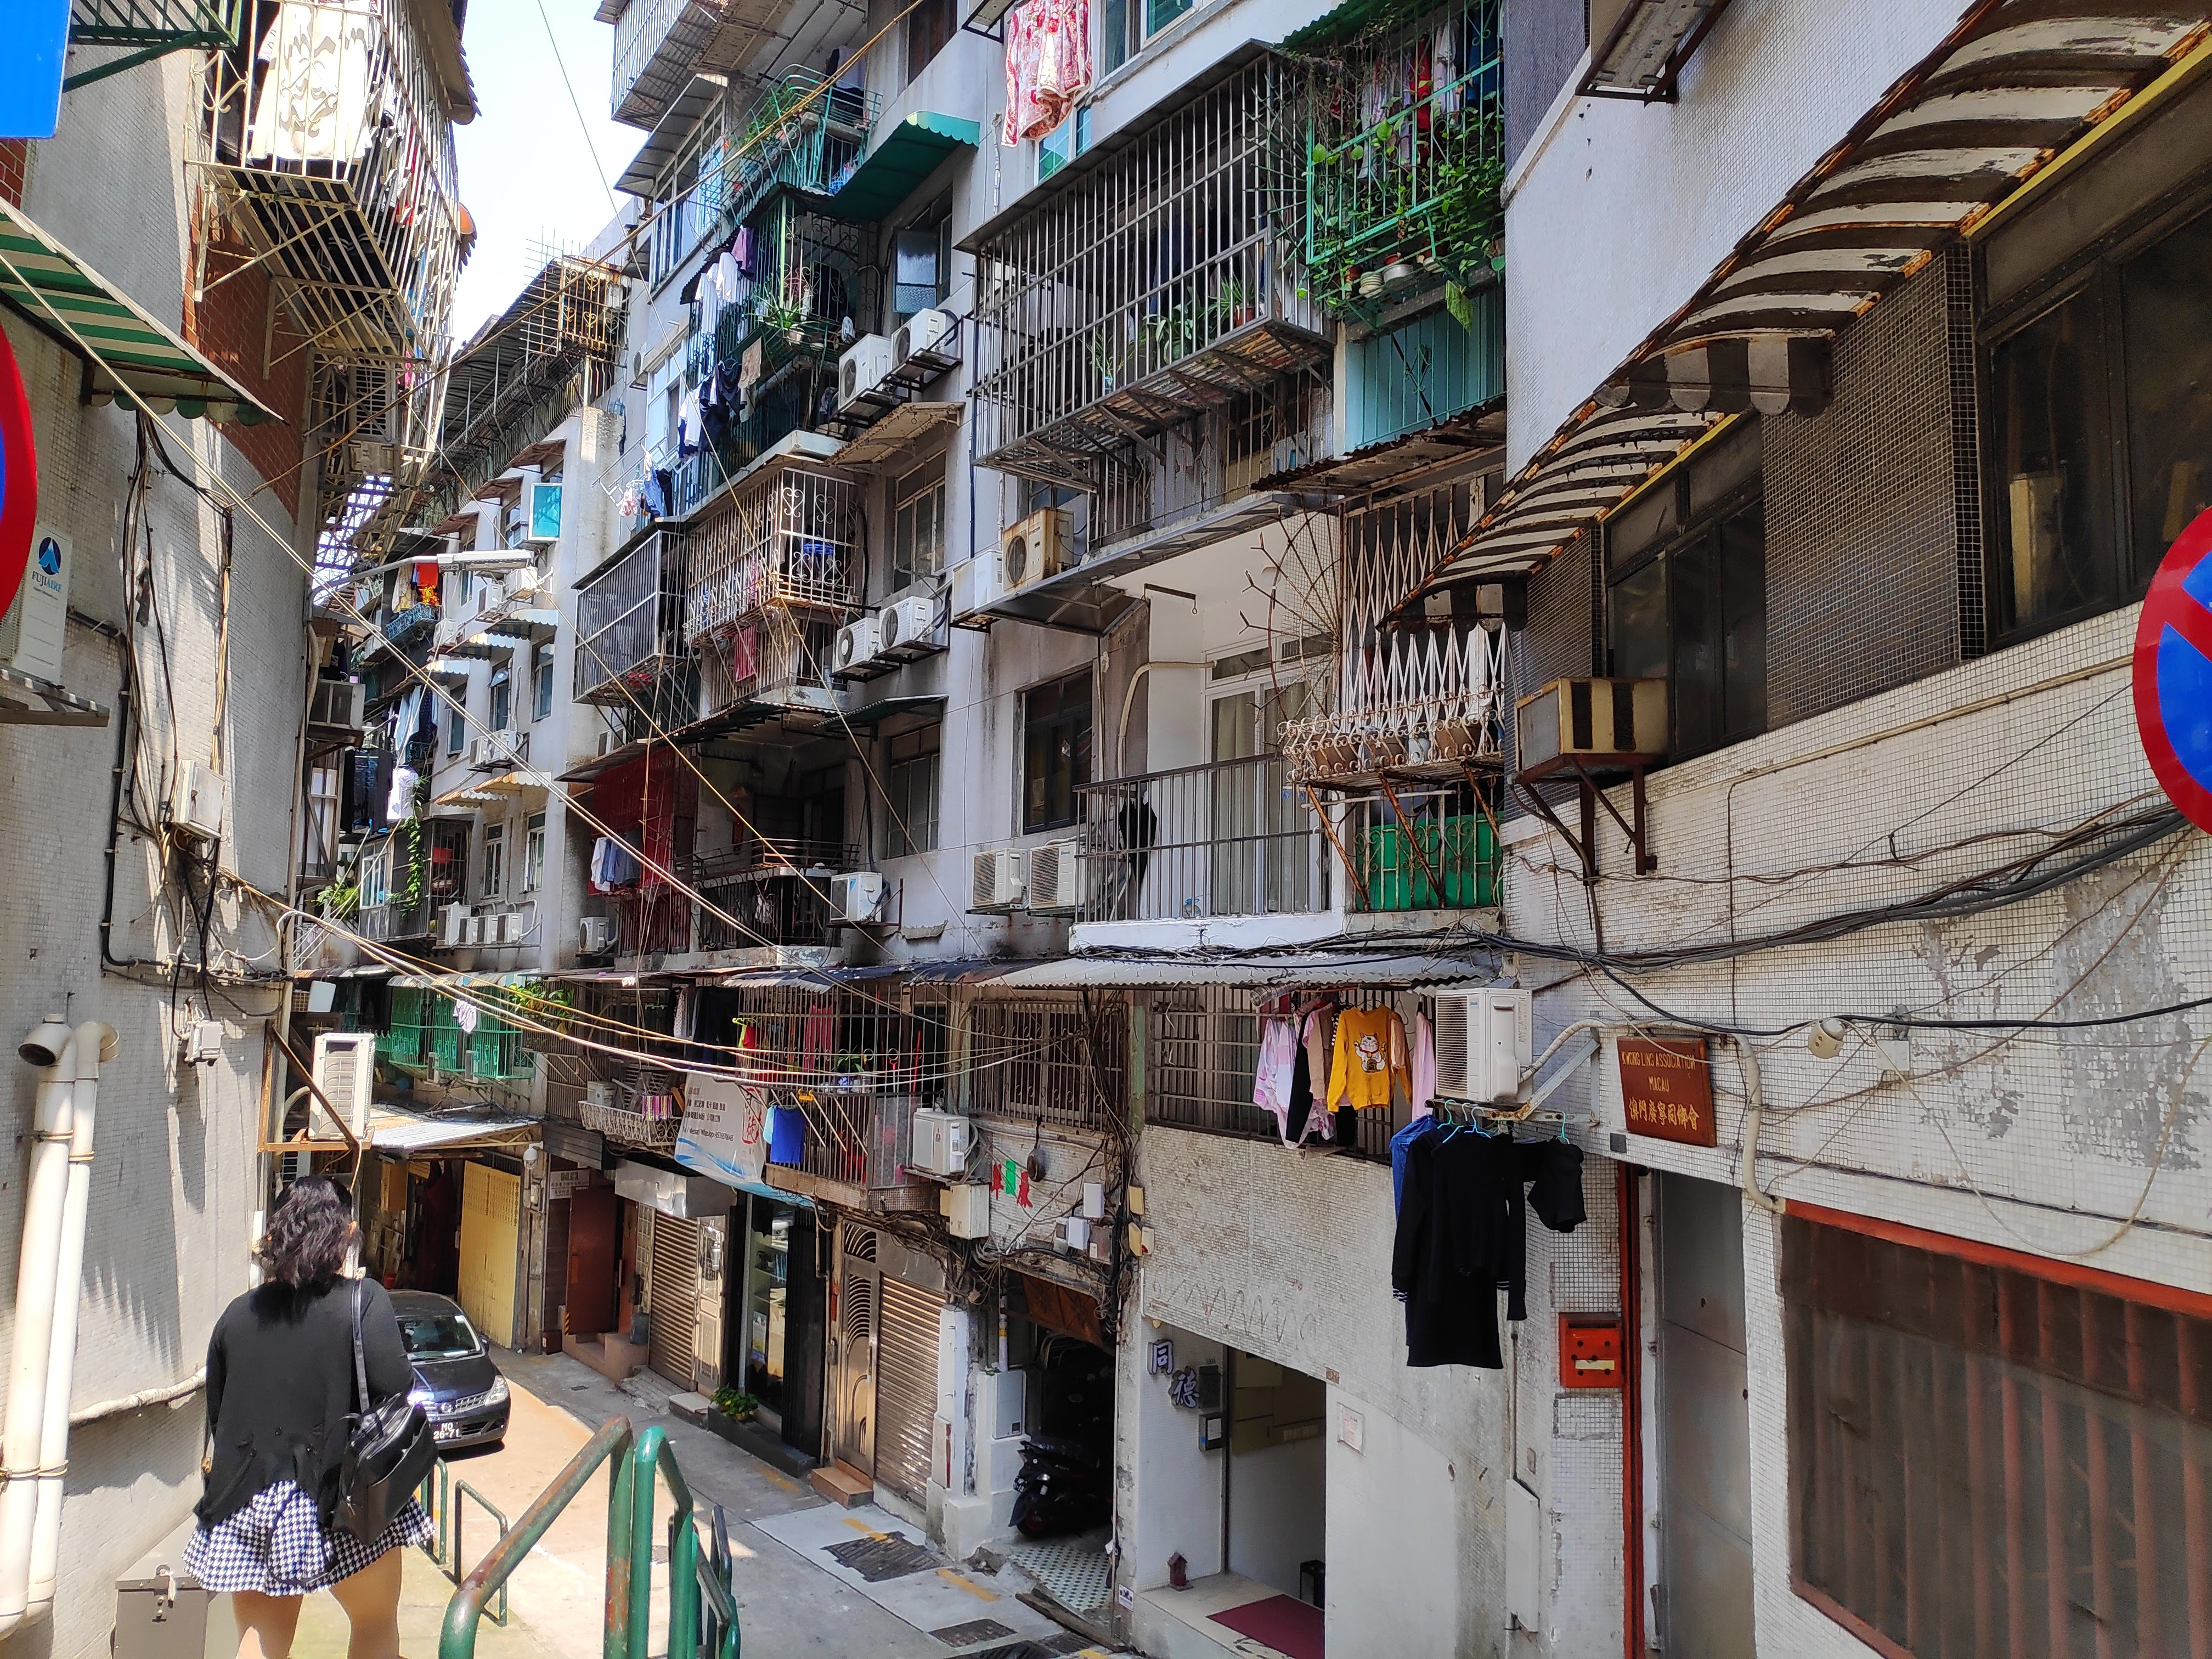 Houses in Macao